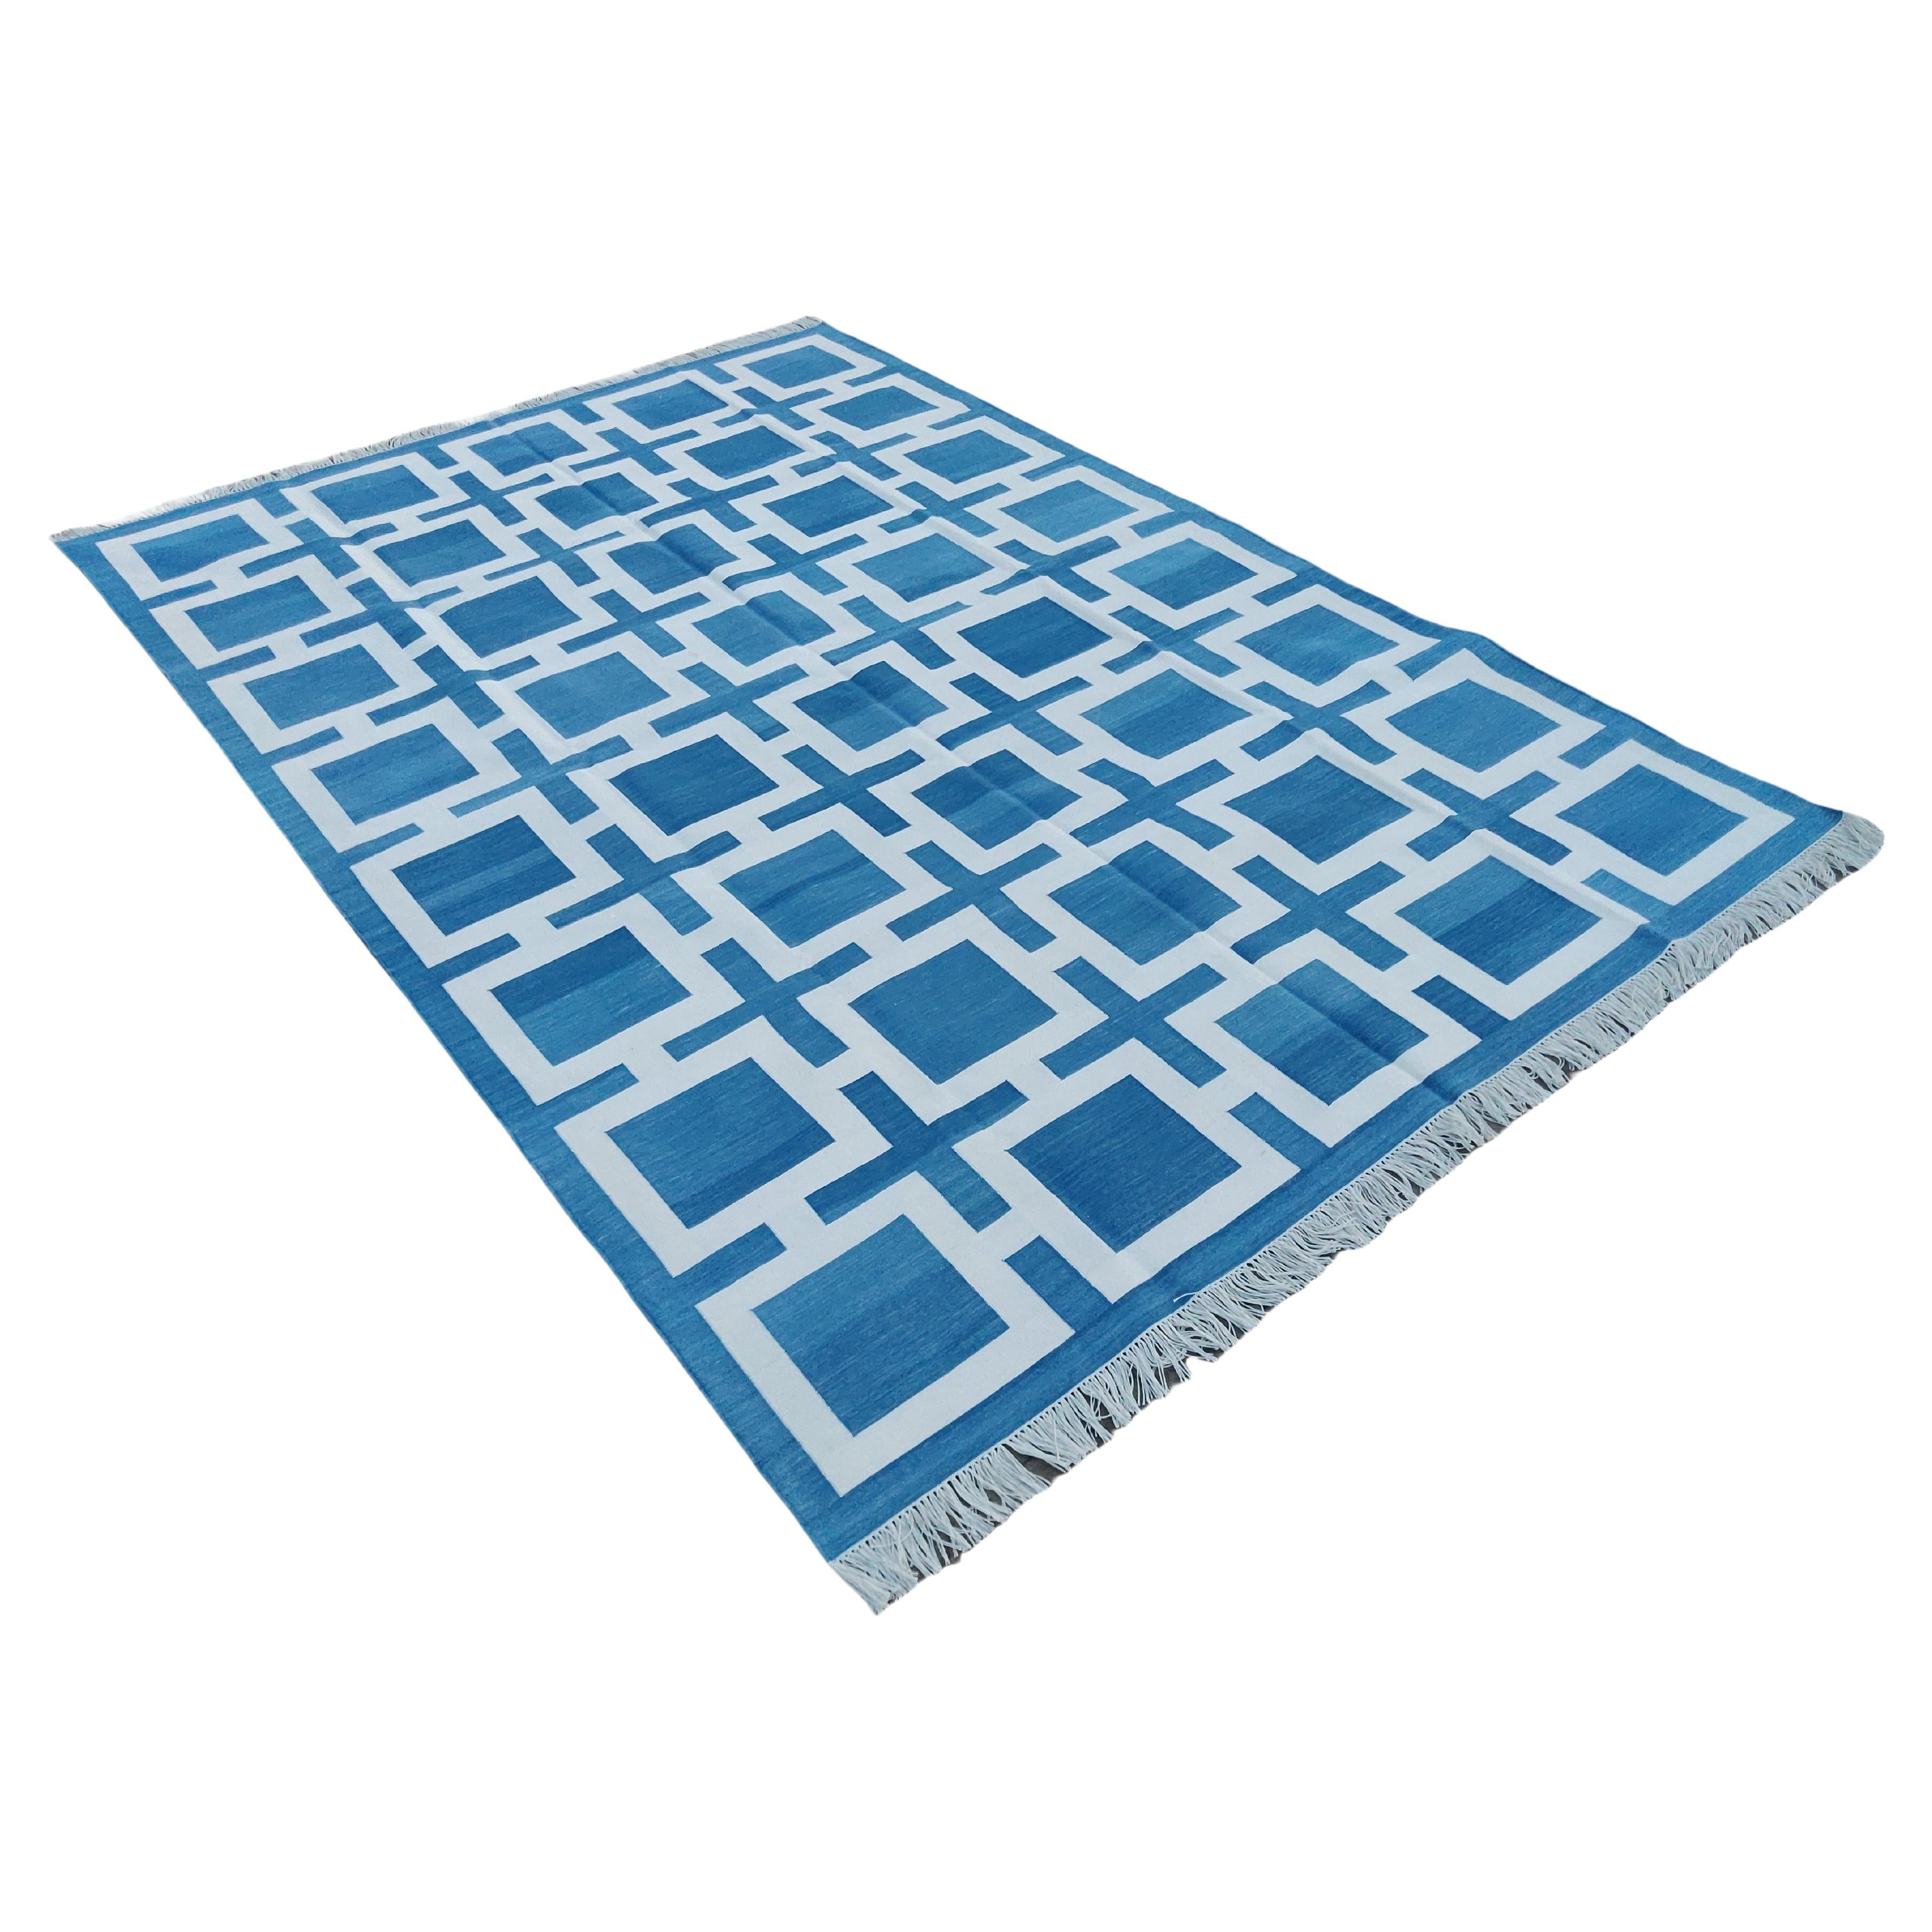 Handmade Cotton Area Flat Weave Rug, 6x9 Blue And White Geometric Indian Dhurrie